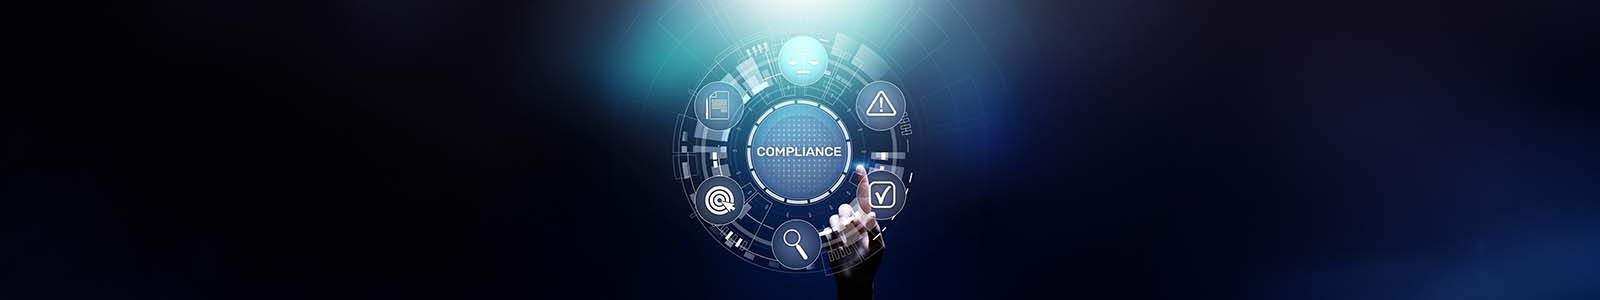 Improve compliance through the use of a digital document management system